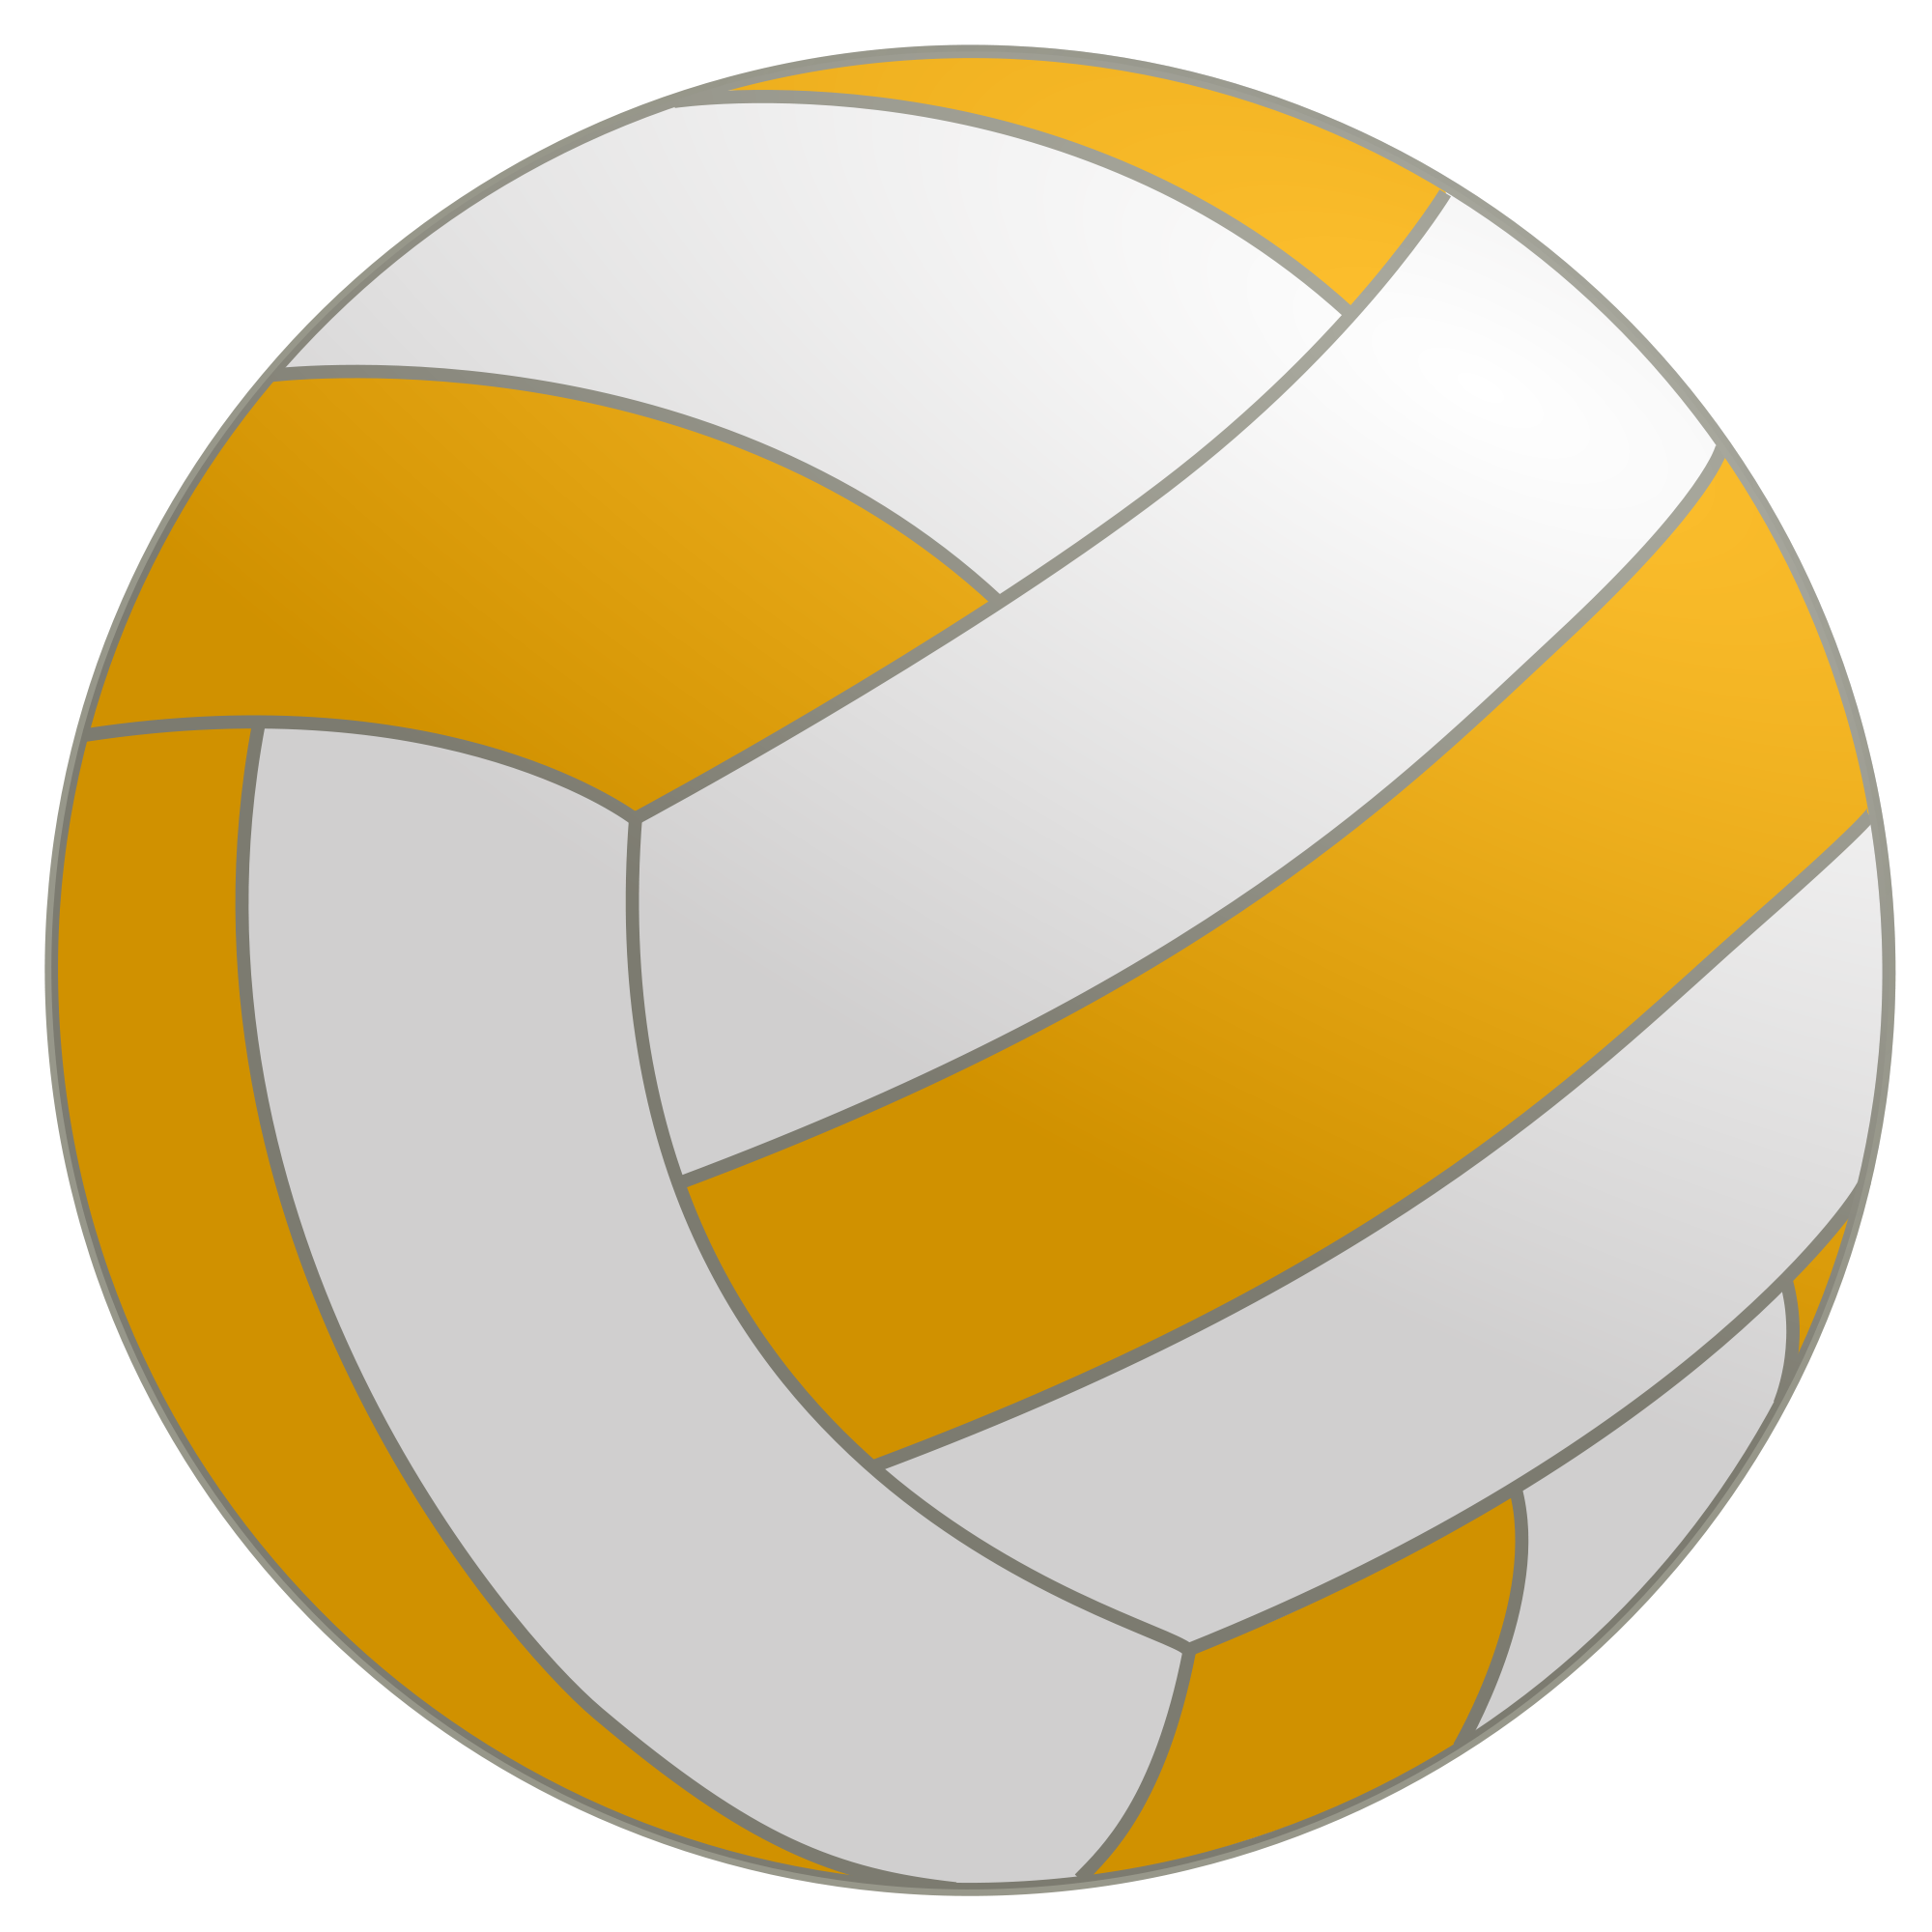 File netball svg wikimedia. Volleyball clipart icon